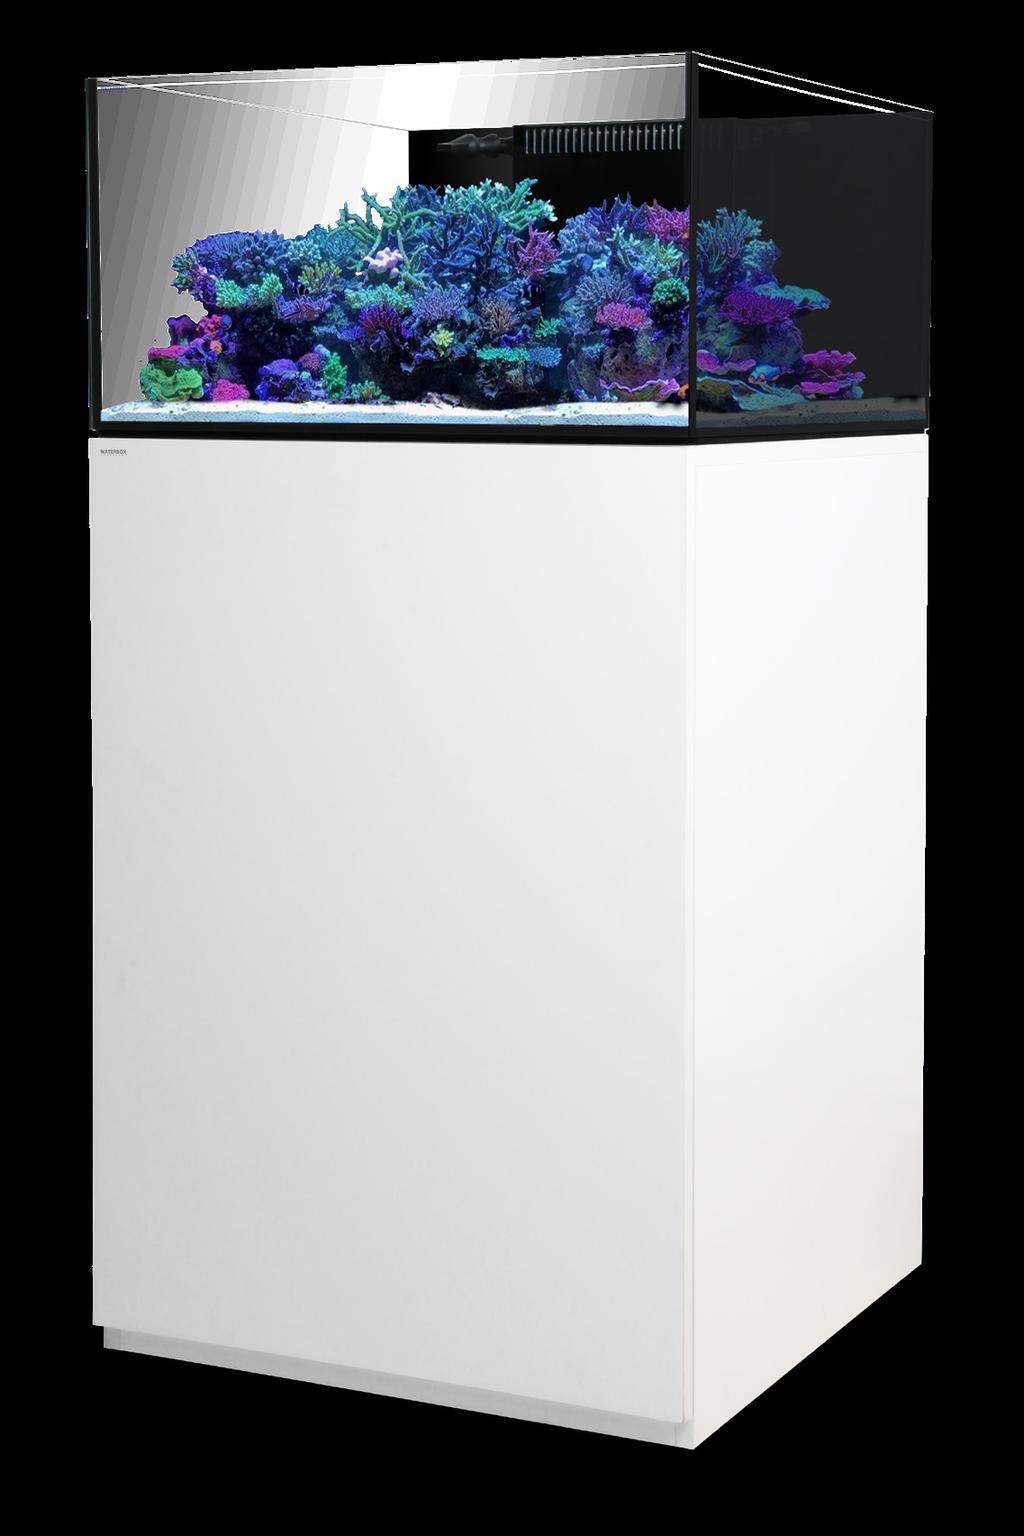 Waterbox has taken the highly acclaimed Platinum system design and created a proprietary aquaculture style aquarium for serious hobbyists.